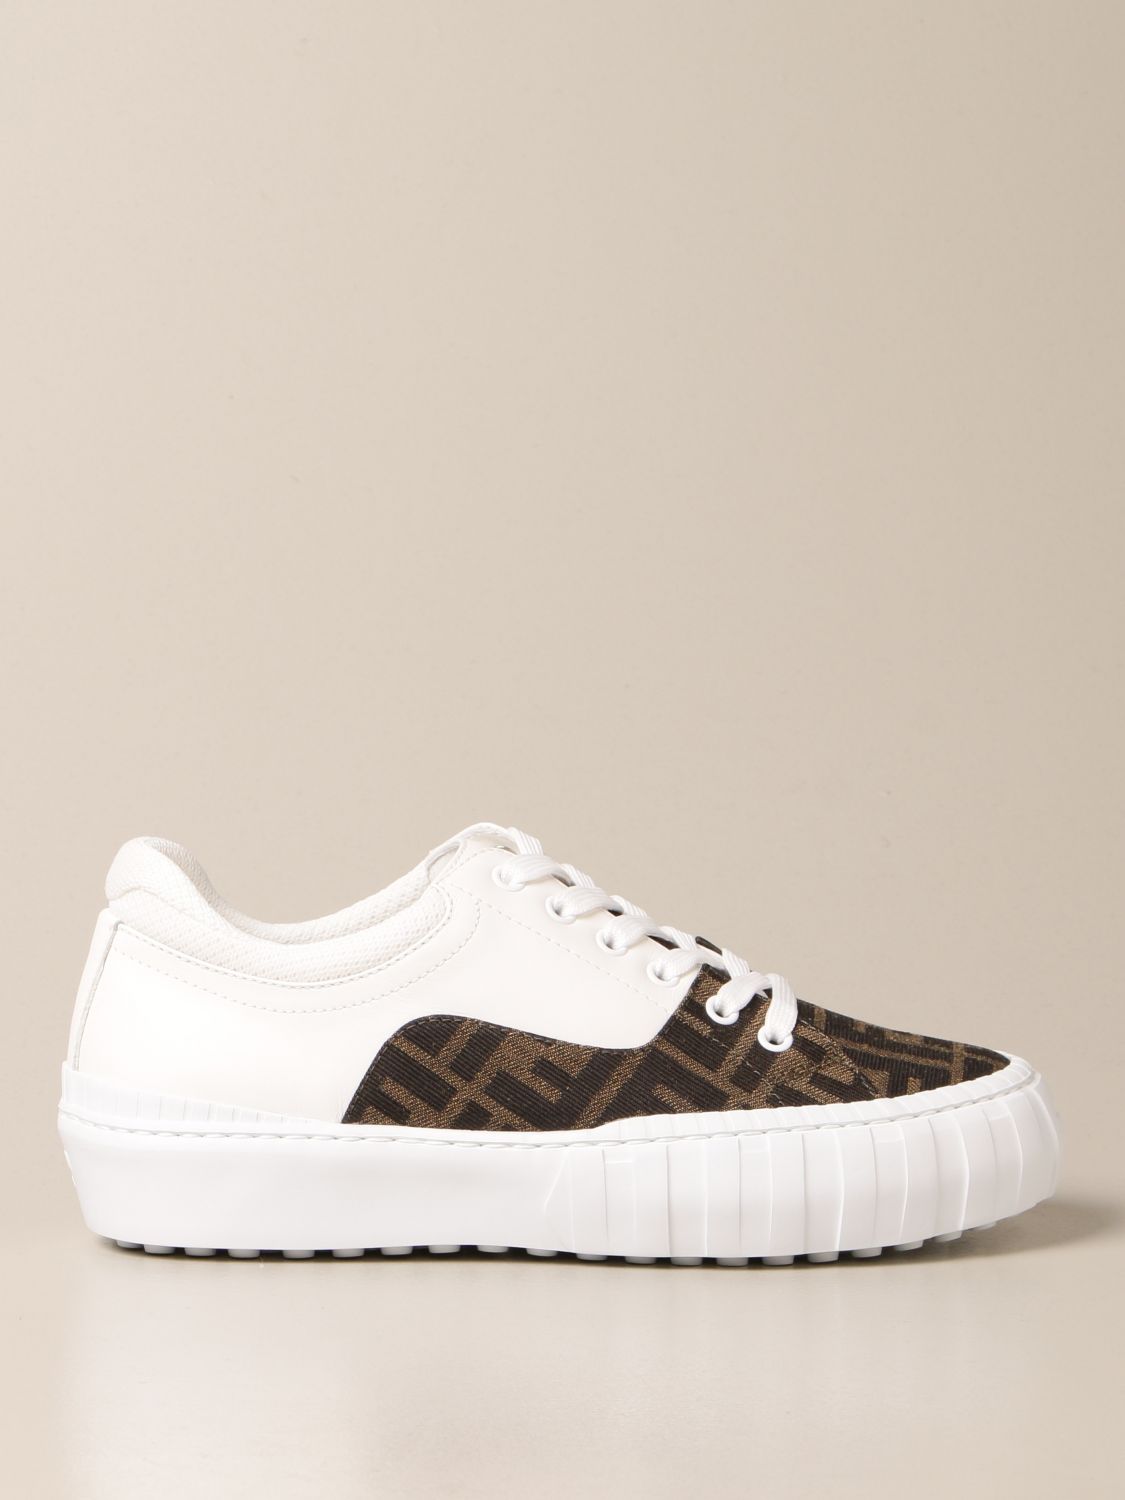 FENDI: sneakers in leather and FF fabric - White | Fendi sneakers ...